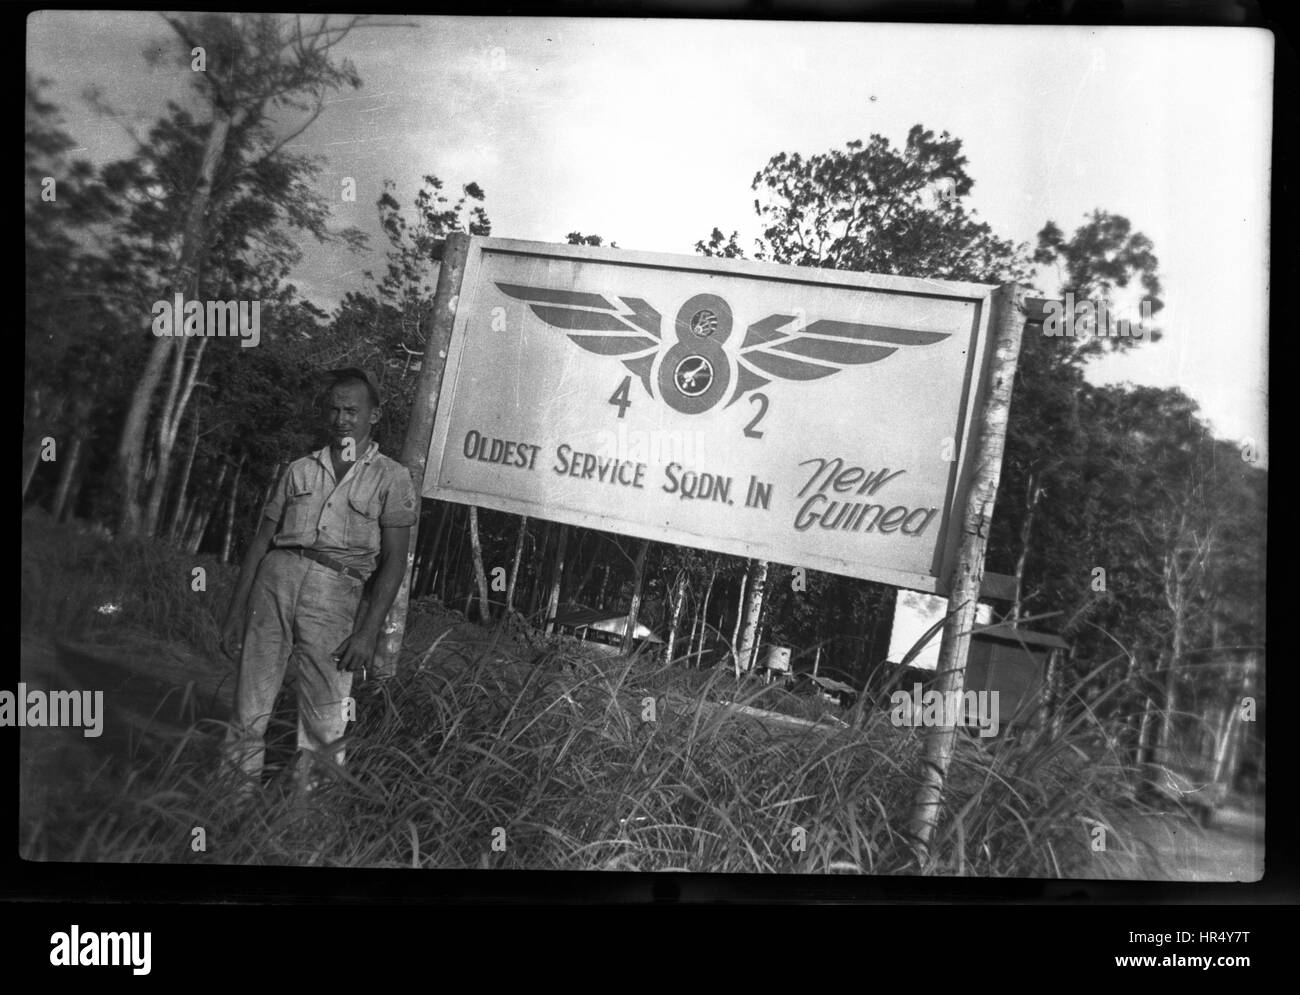 American standing on front of sign for the 8th Operations Group in New Guinea during WWII.  United States Army Air Corps Stock Photo